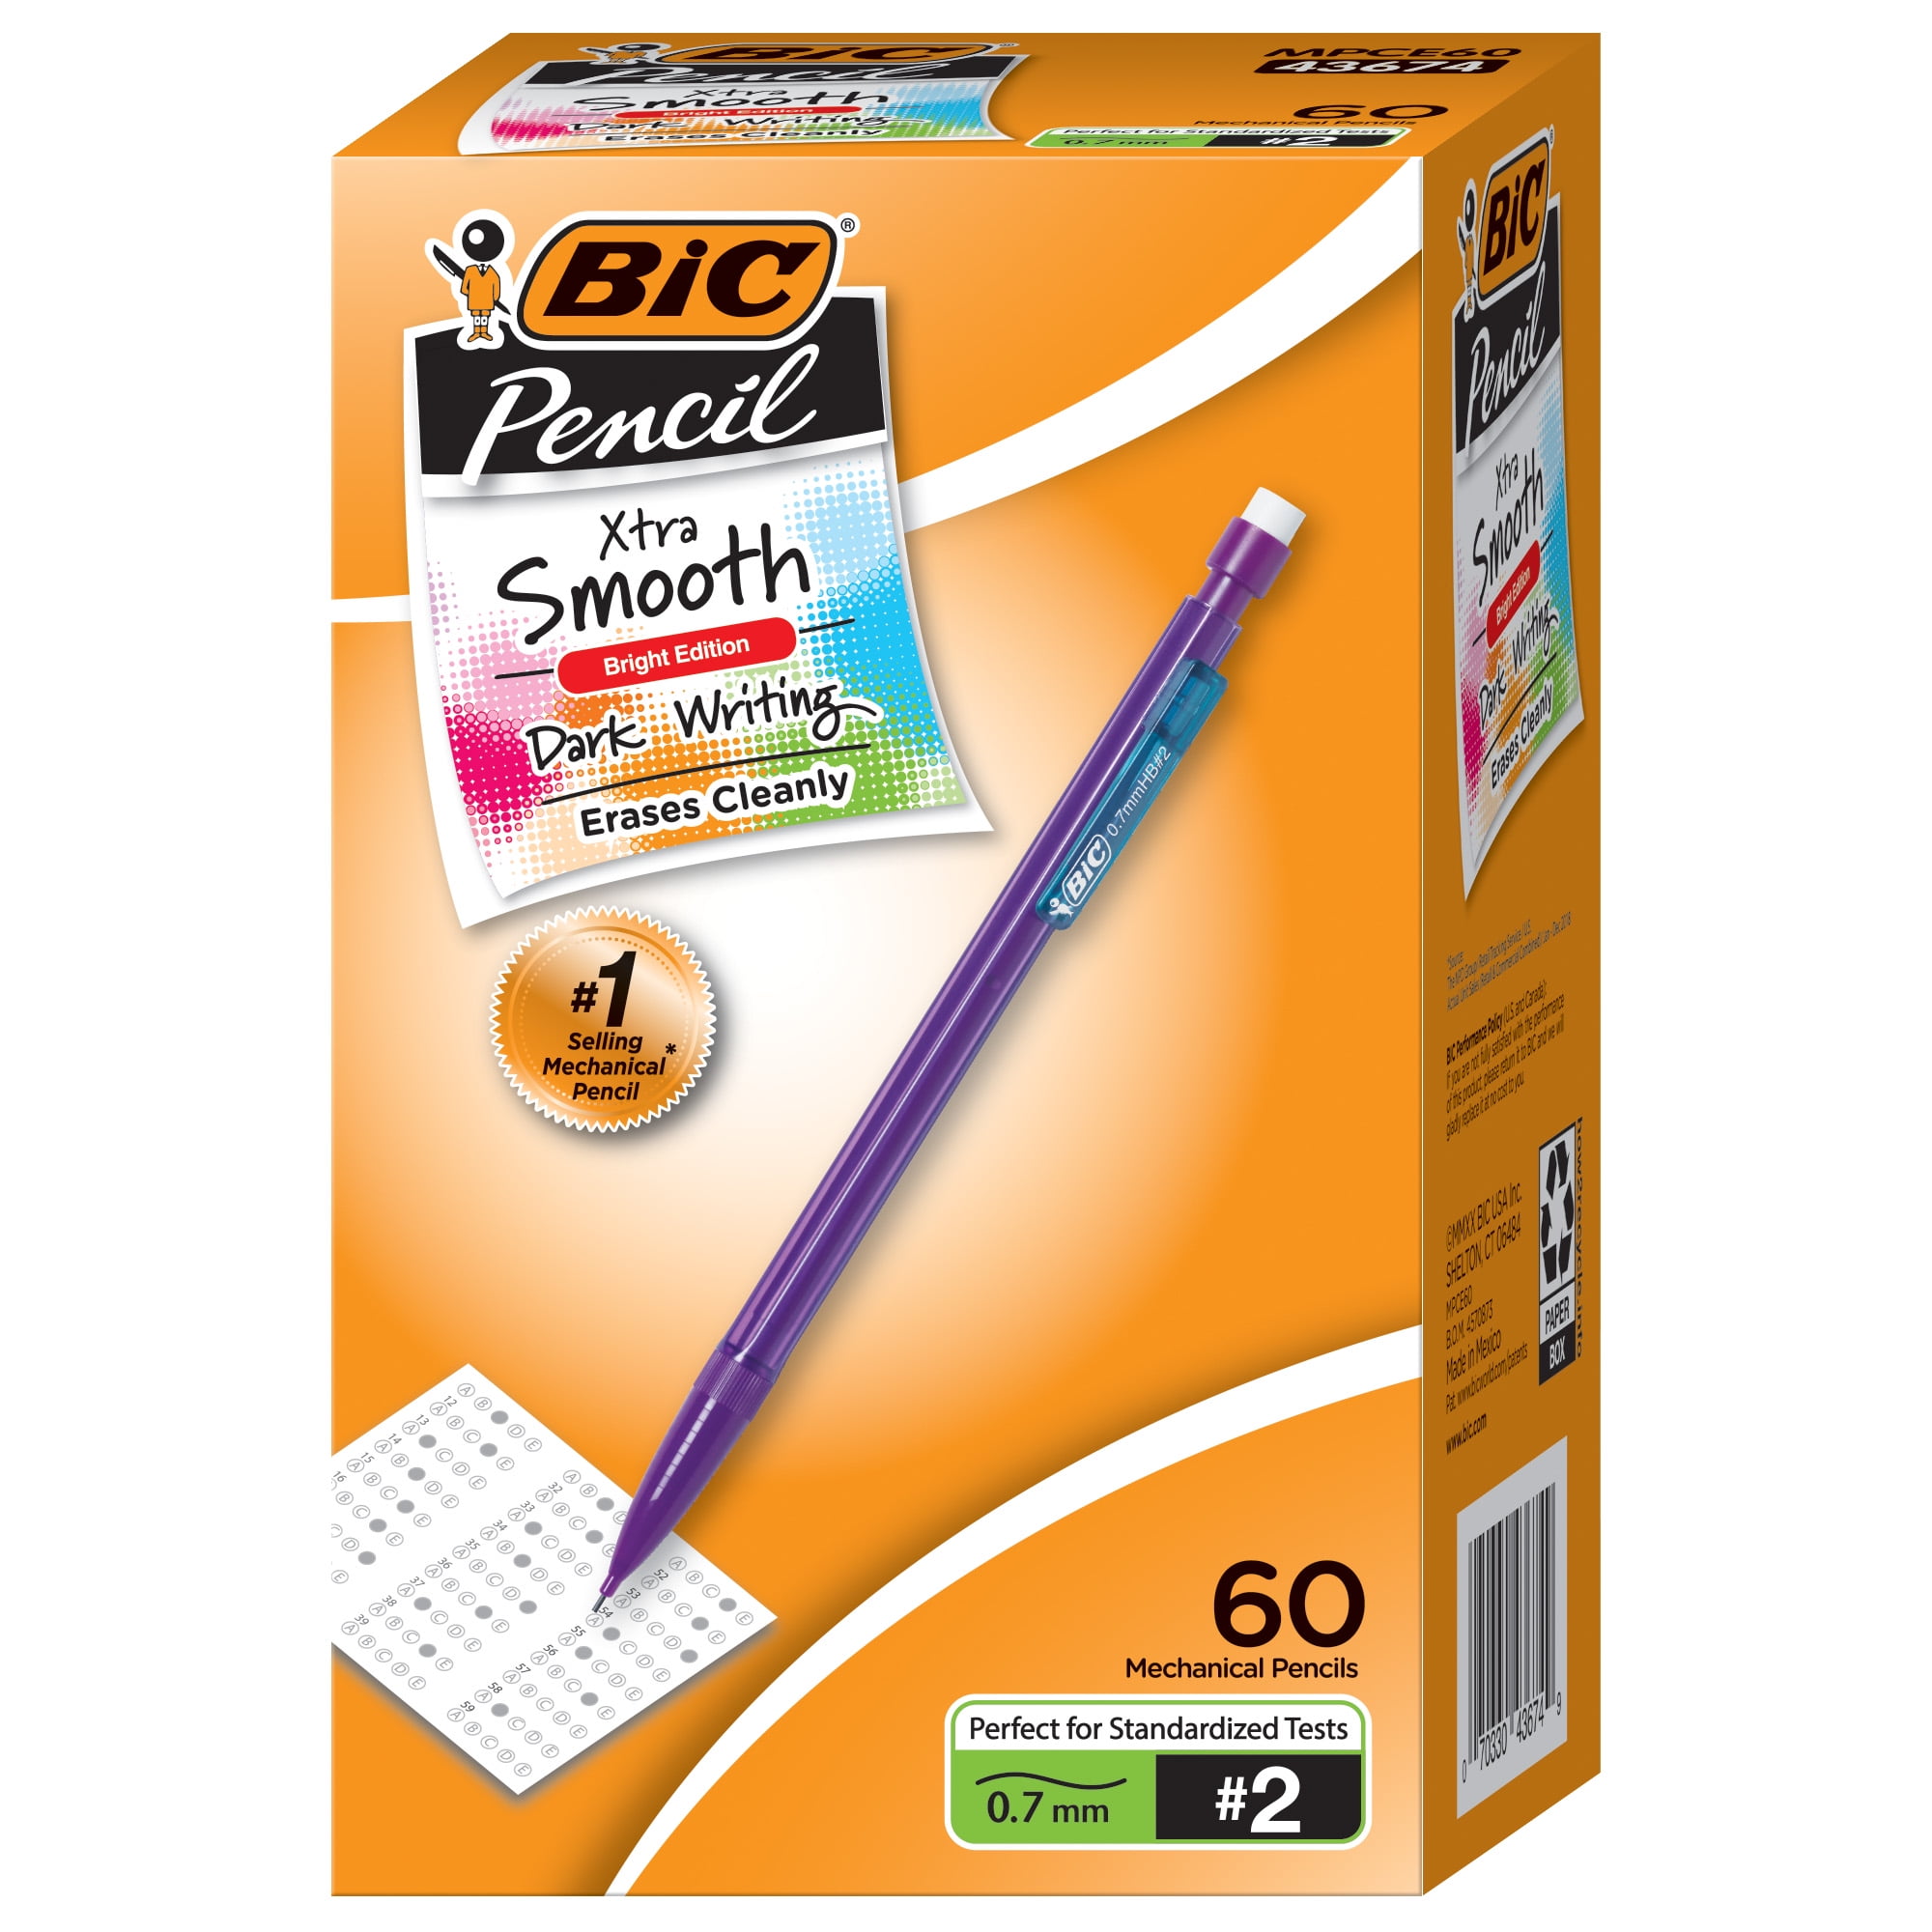 BIC Xtra Smooth Mechanical Pencil 40-Count 0.7mm Medium Point 2 Improved Version